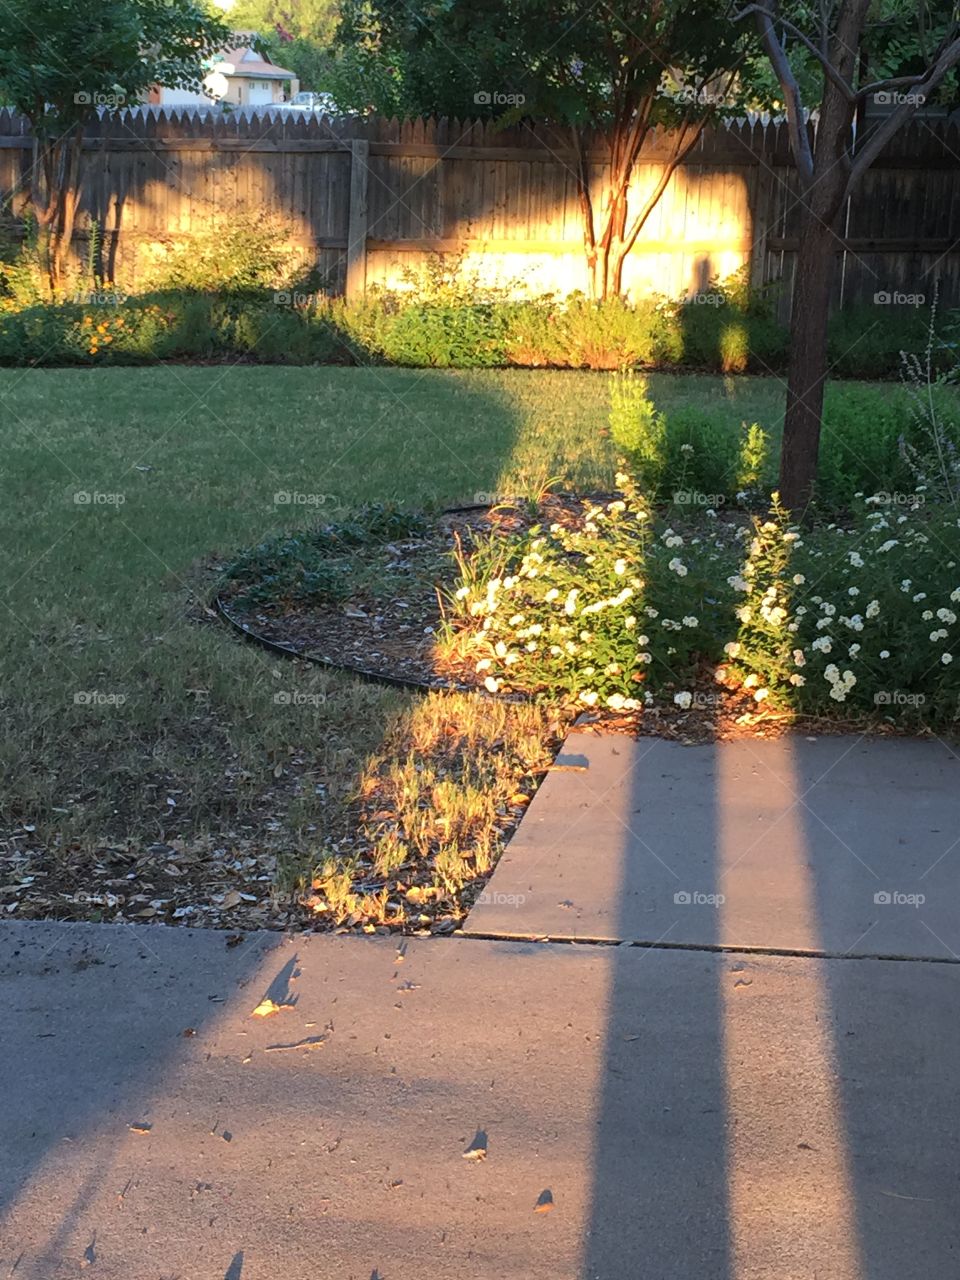 Golden Hour shadows . Shadows in the garden during the morning hours